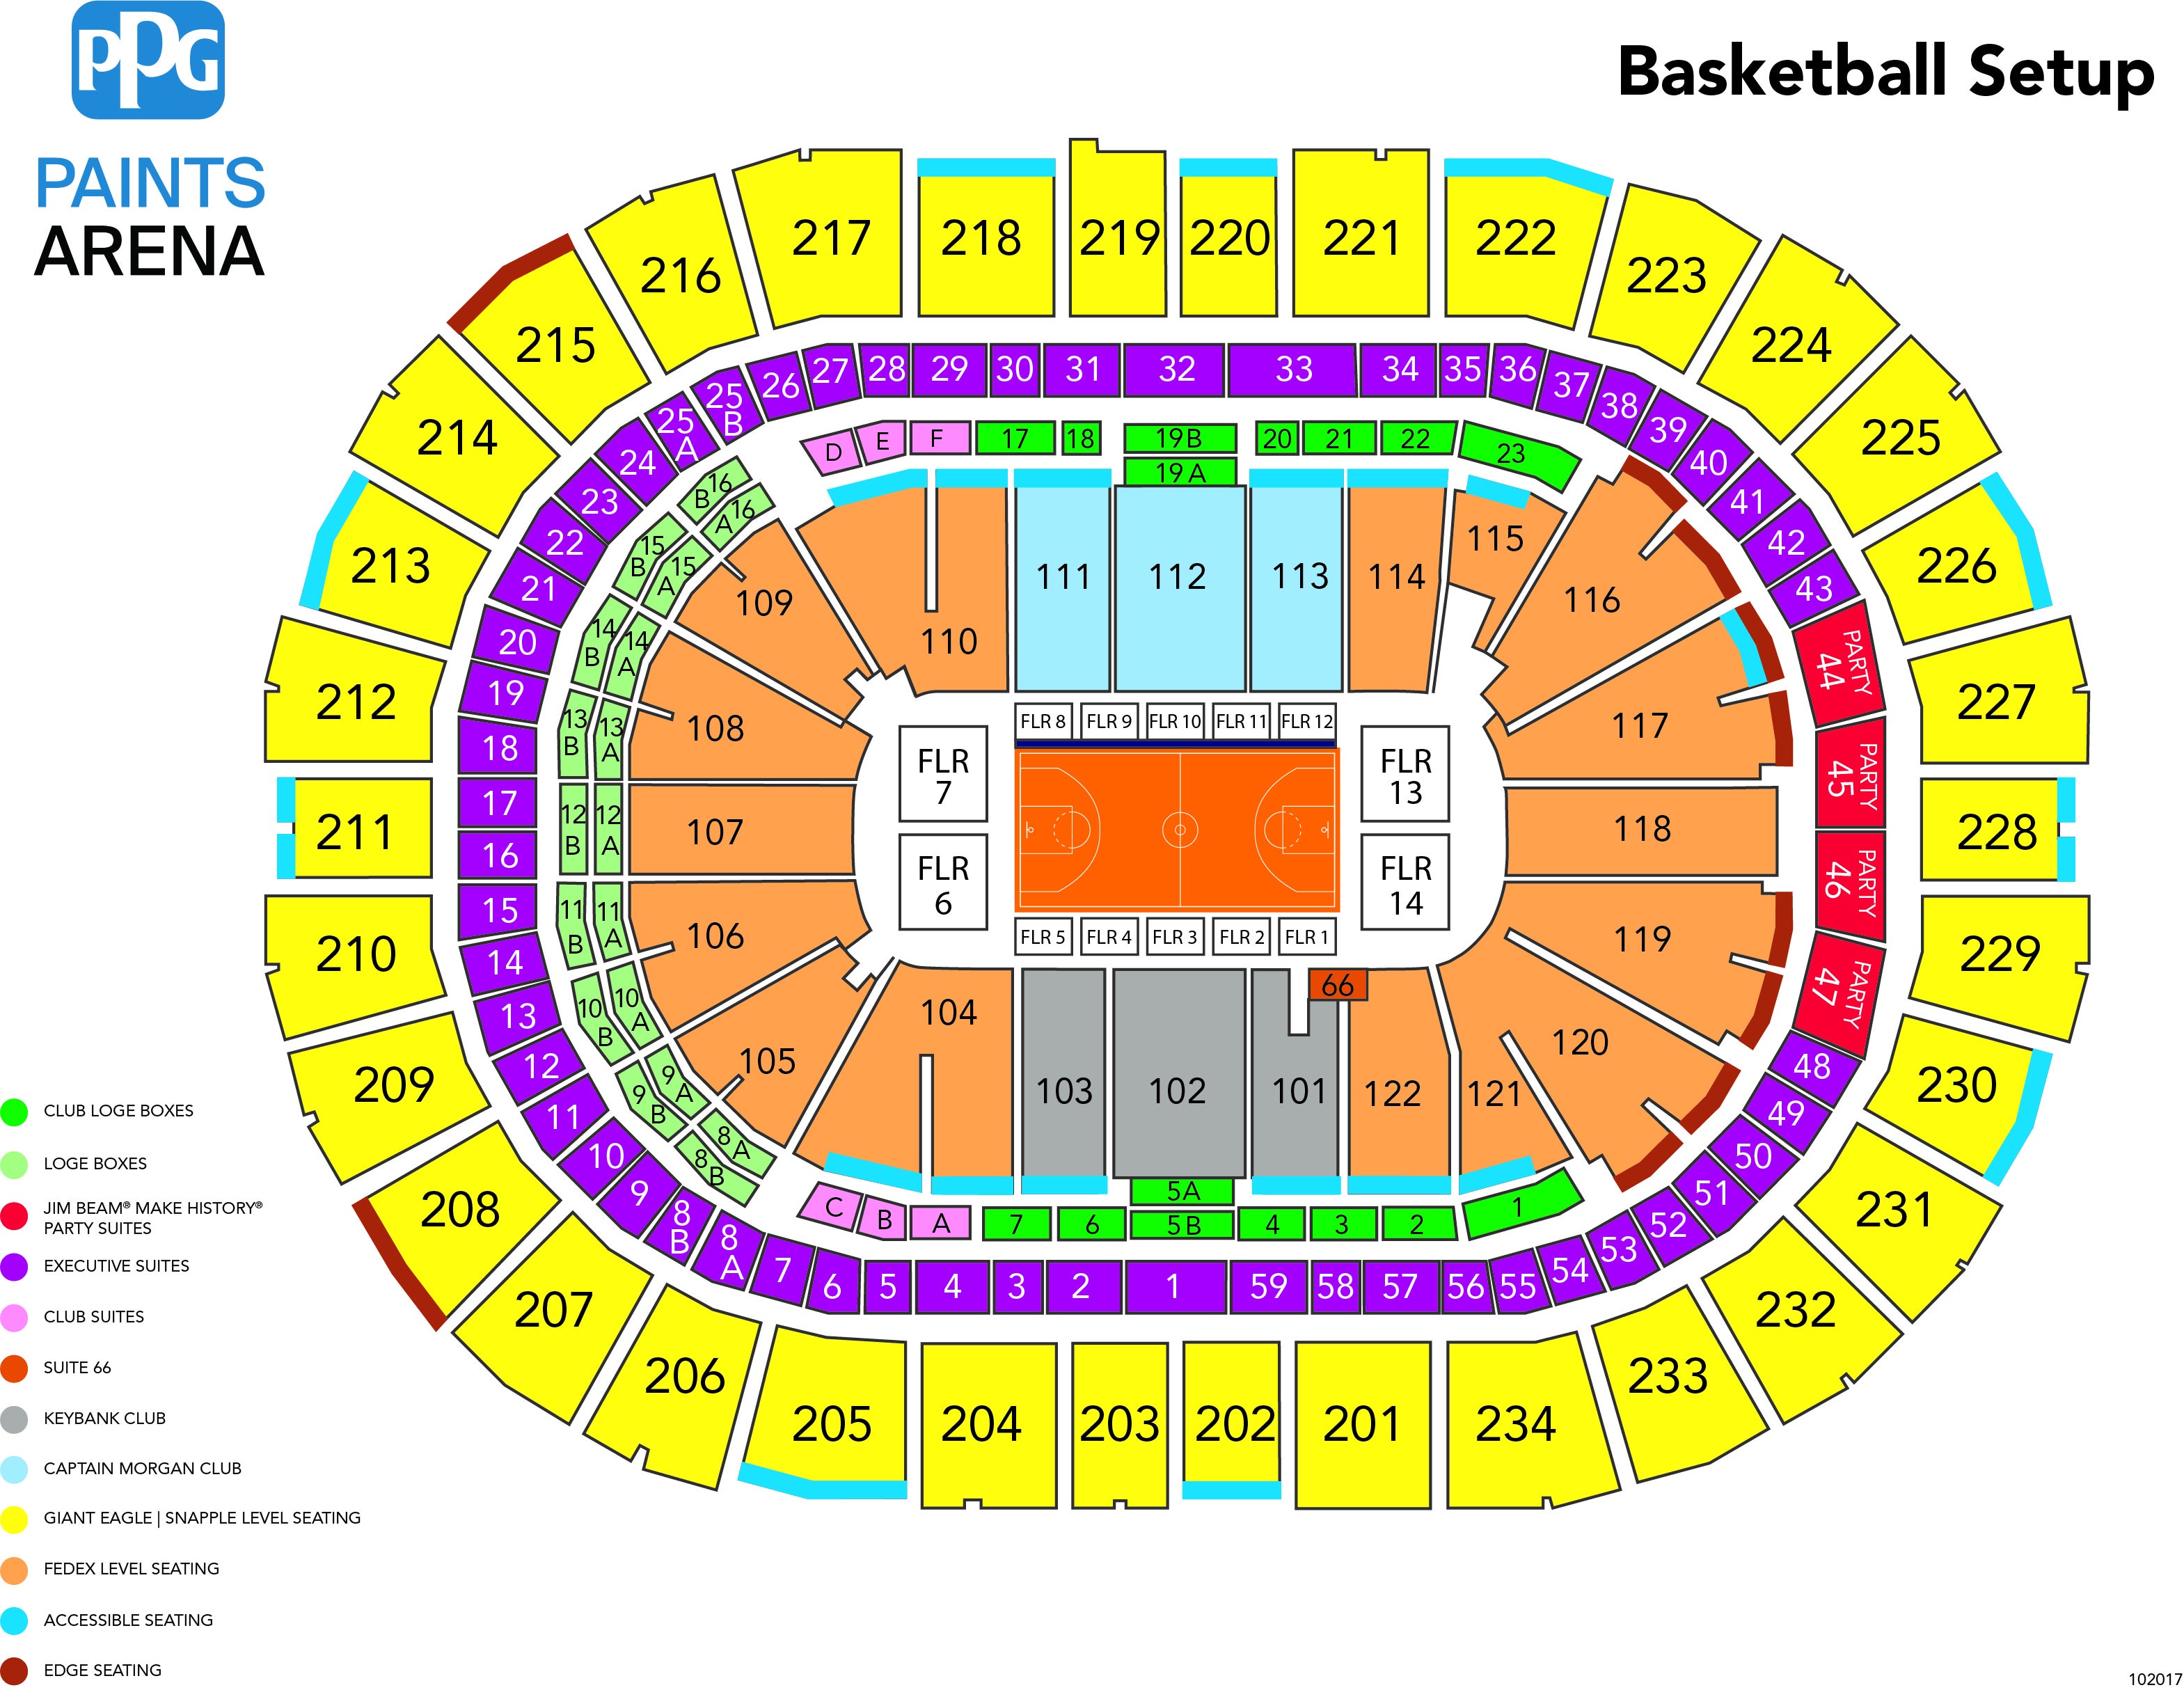 Ppg Paints Arena Basketball Seating Chart